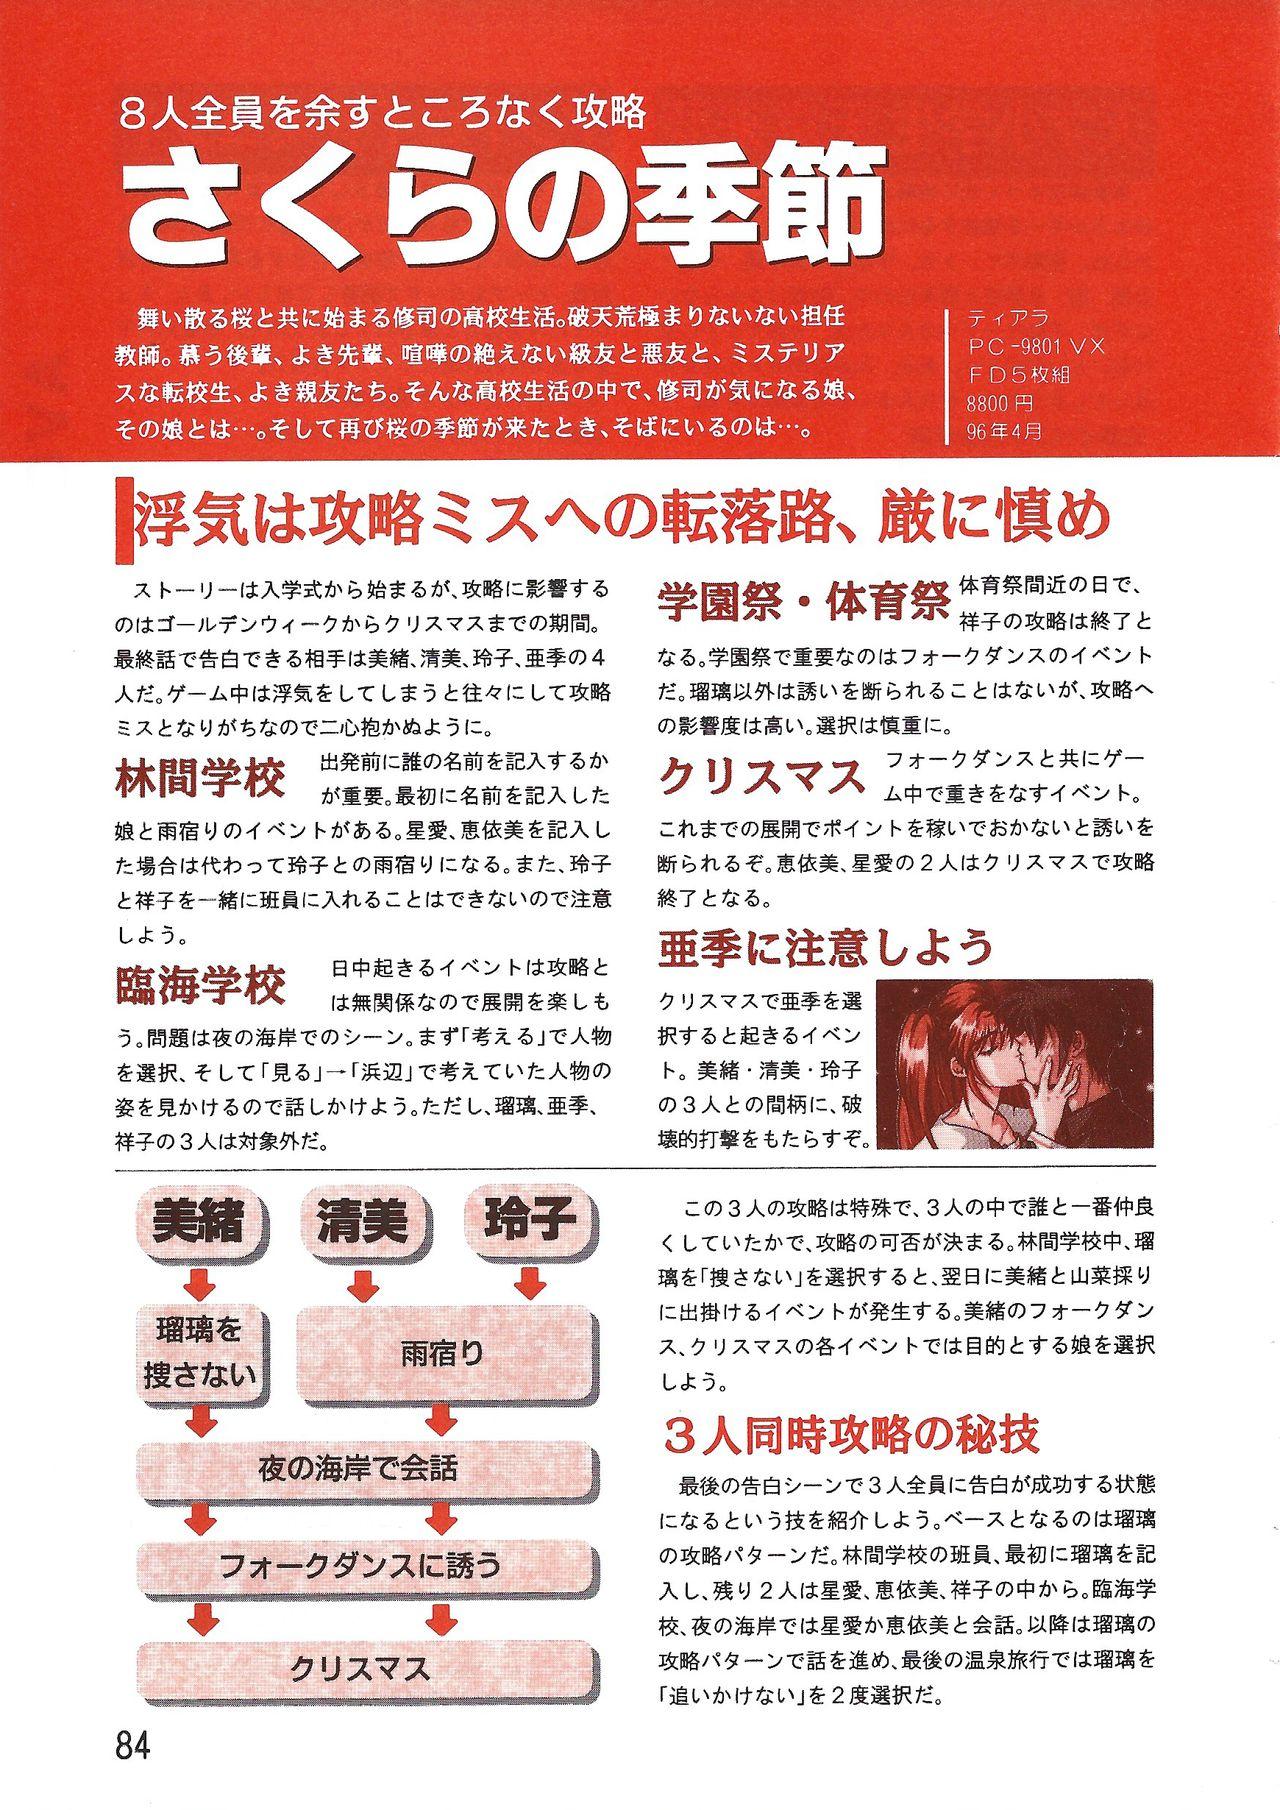 PC Bishoujo Software Strategy Book: Strategy King 2 83